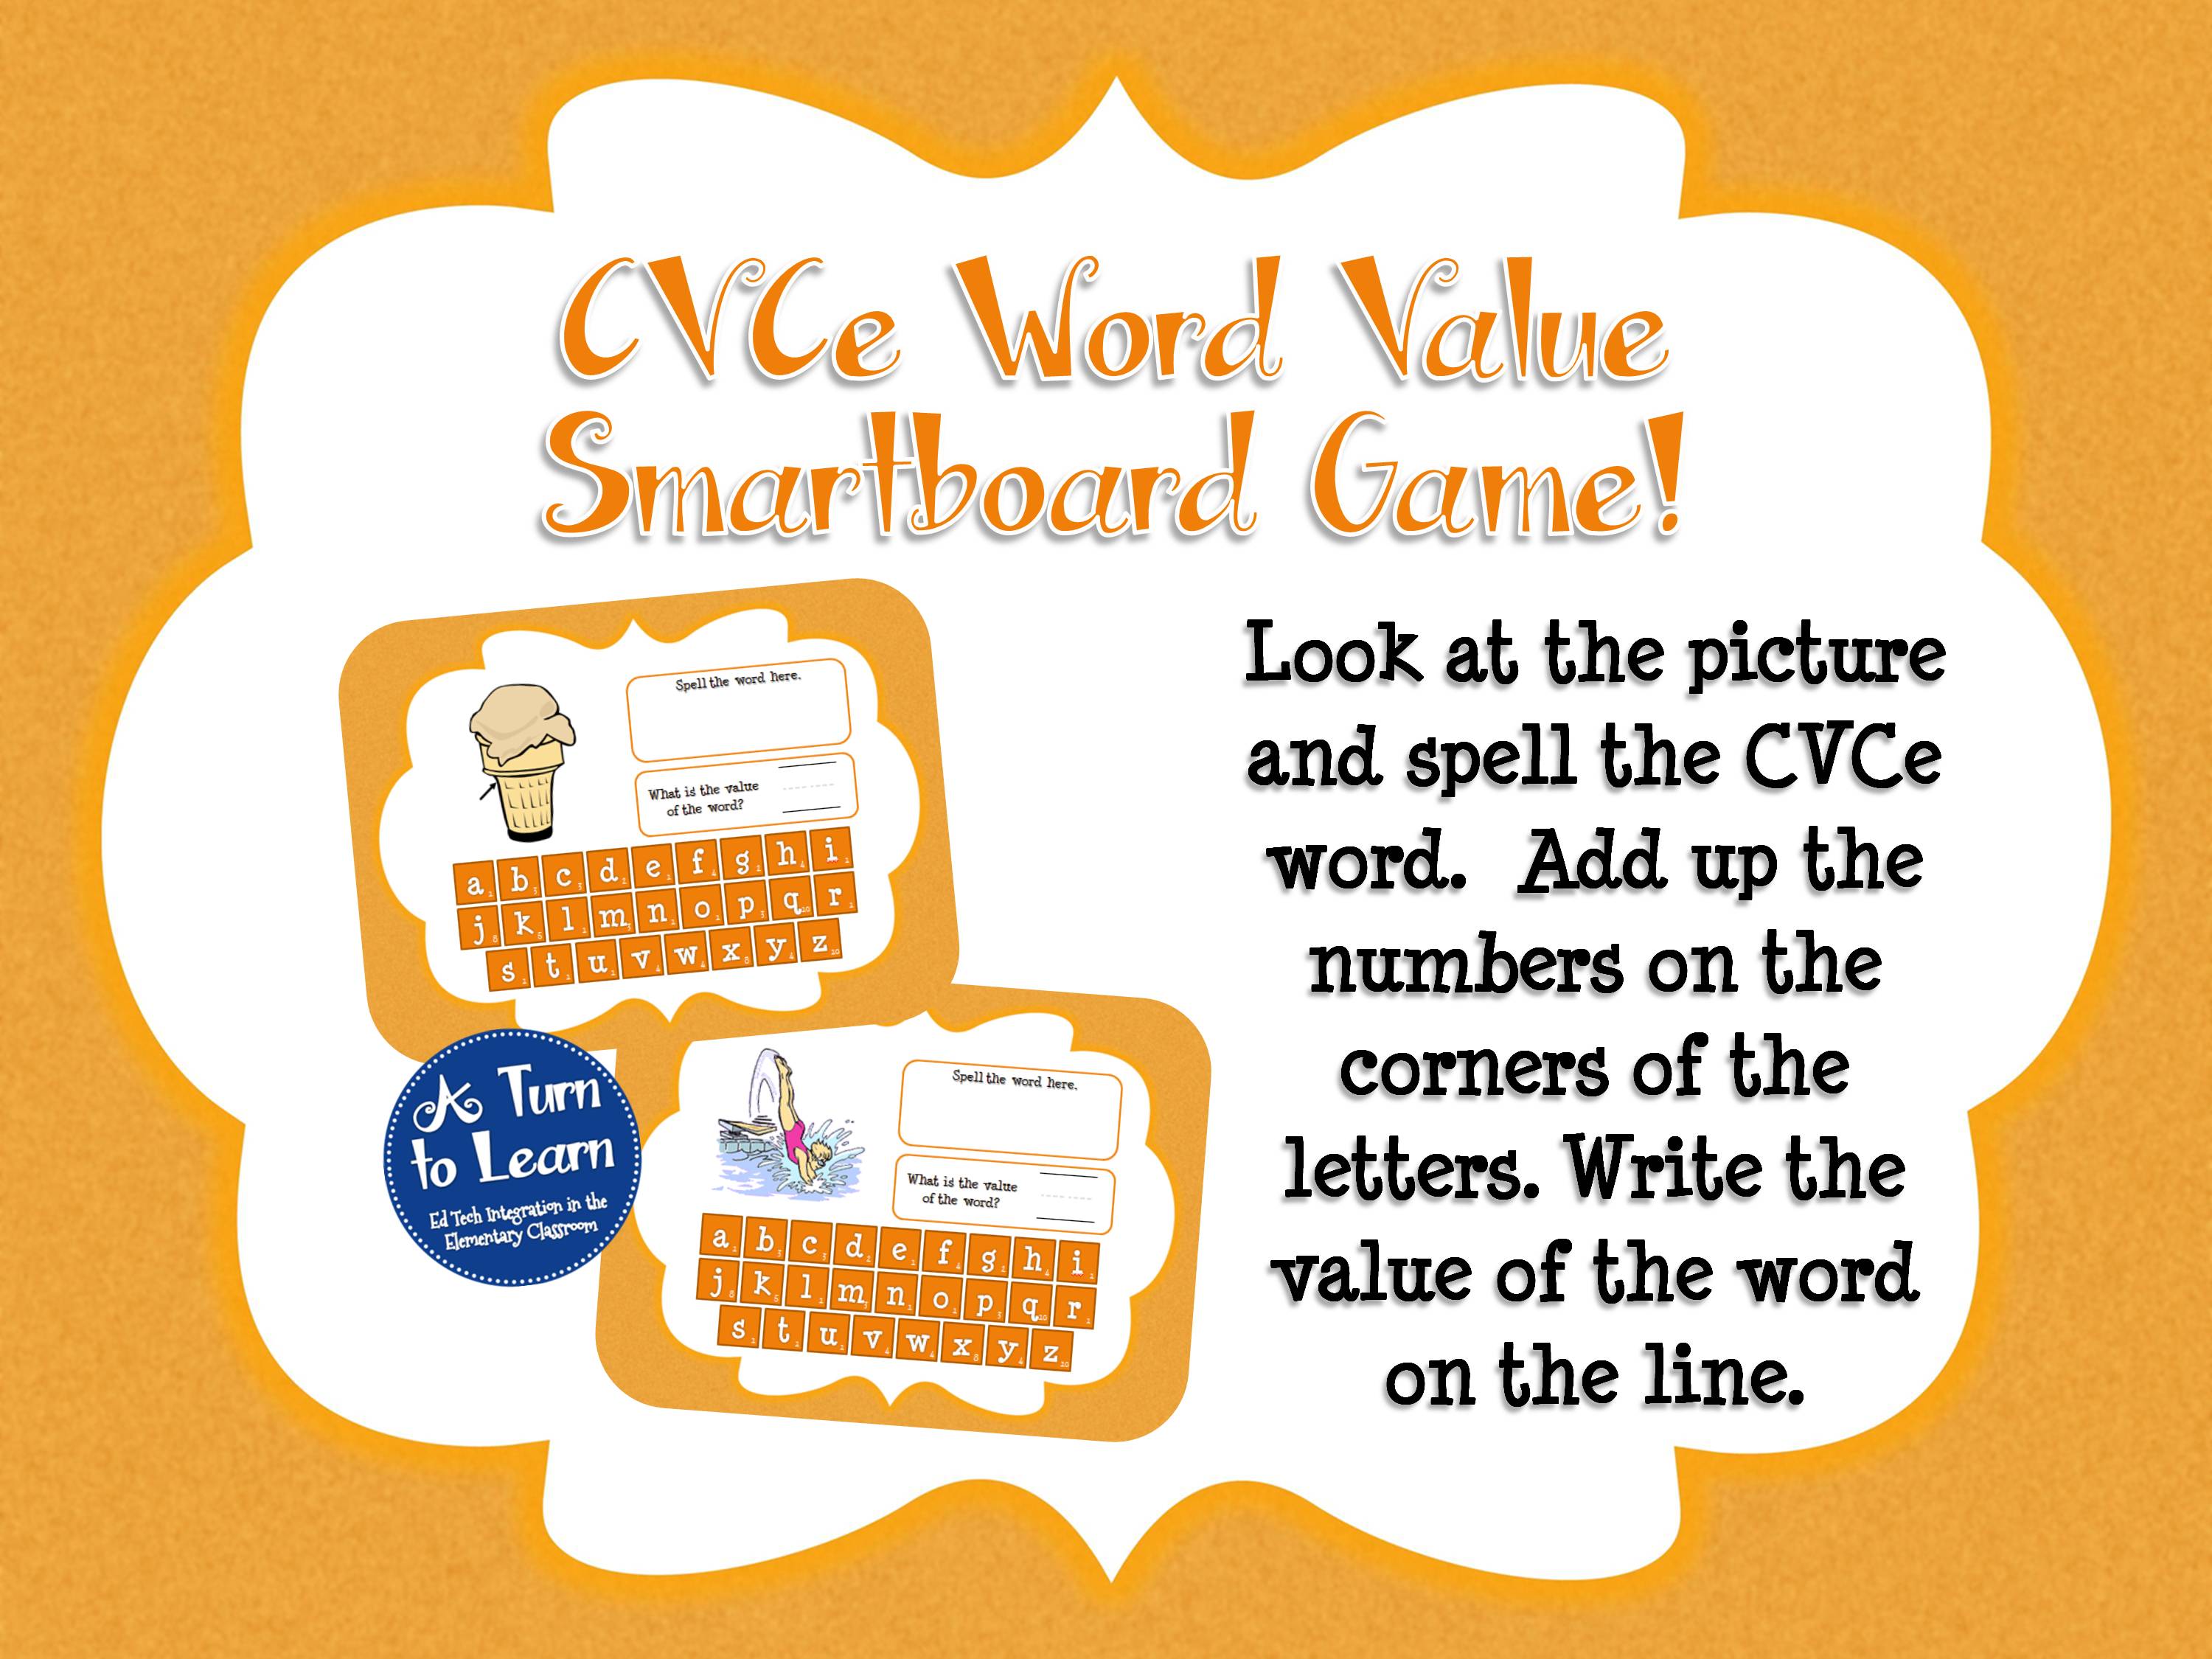 CVCe Smartboard Game - Word value fun for spelling and math!